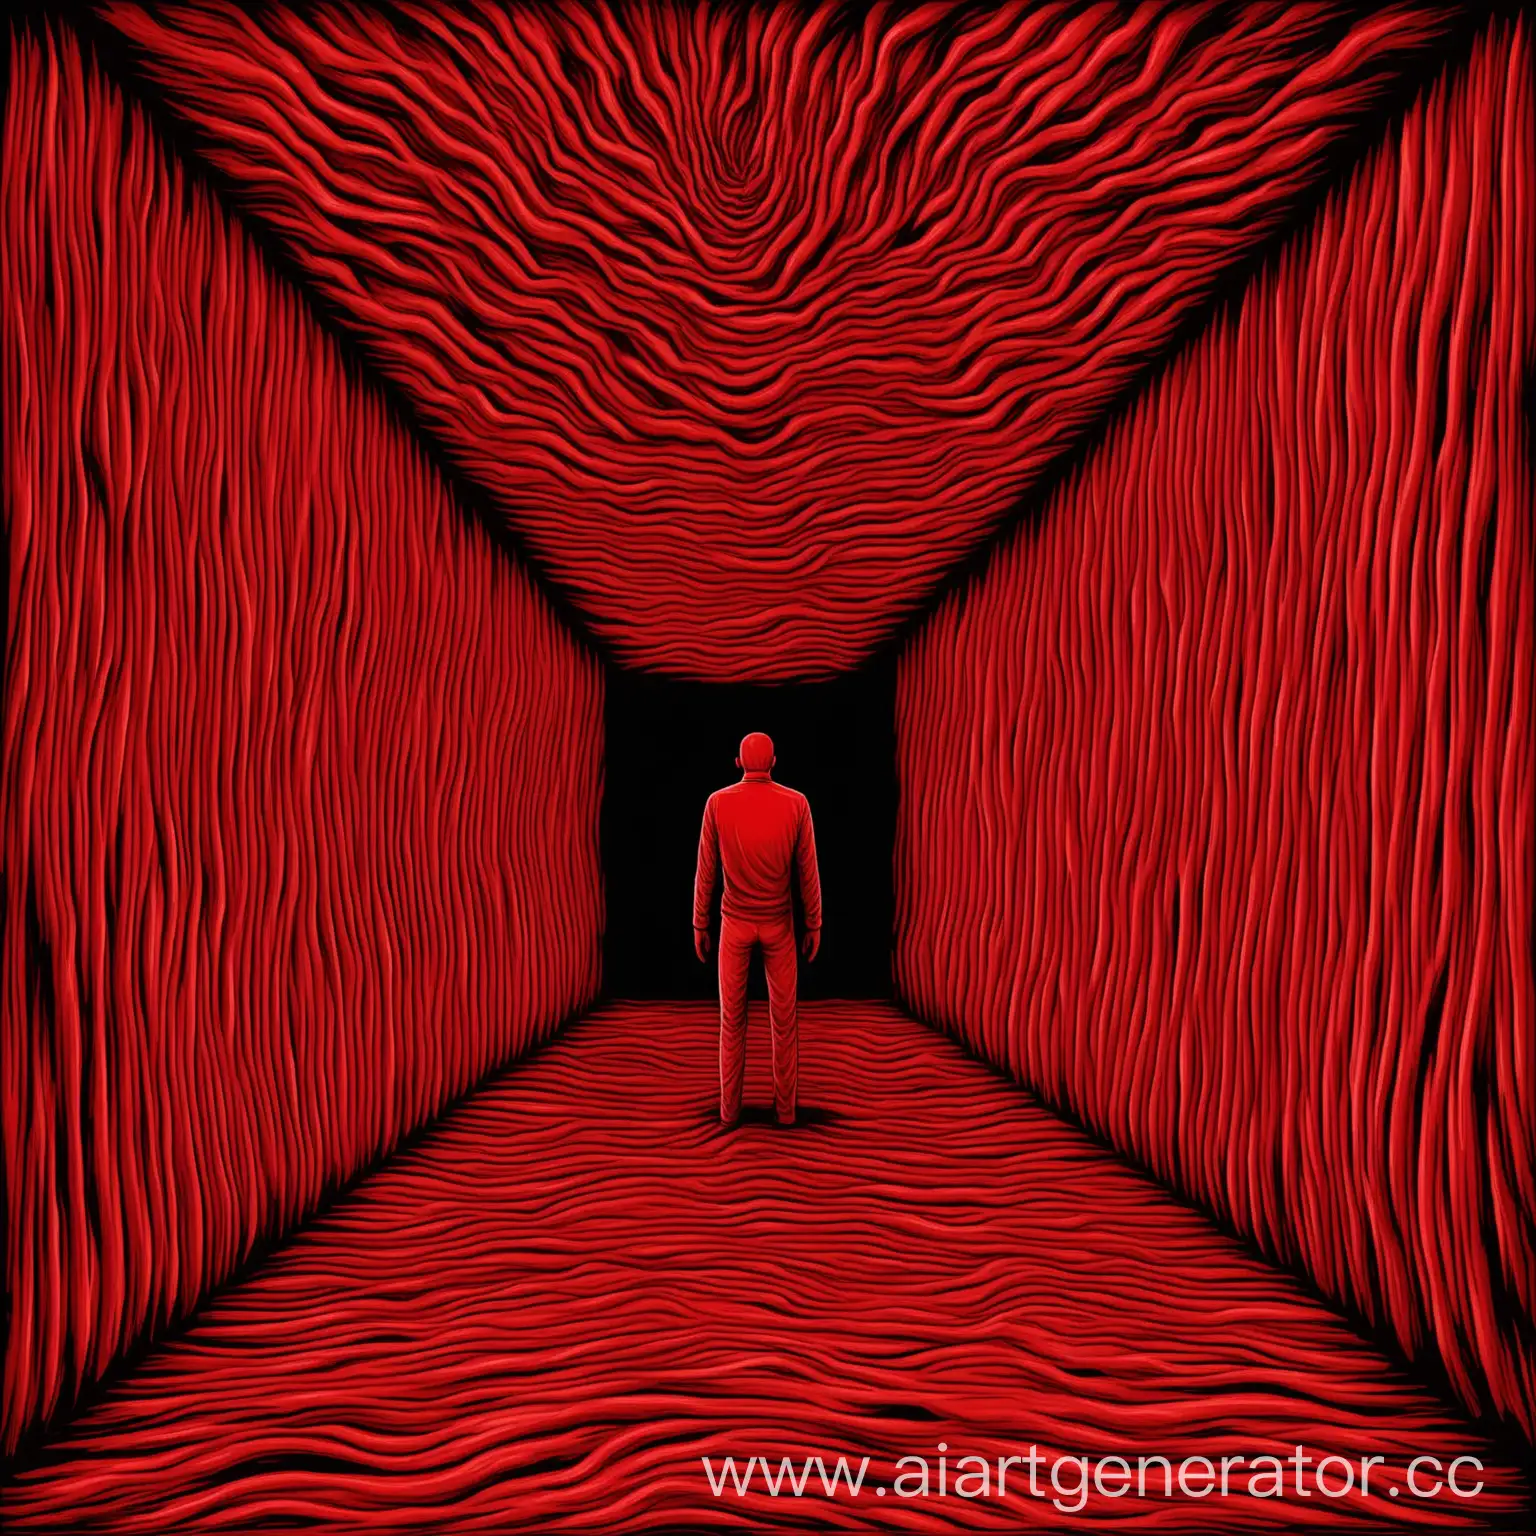 Man in a closed space is afraid (phobia) in red colors